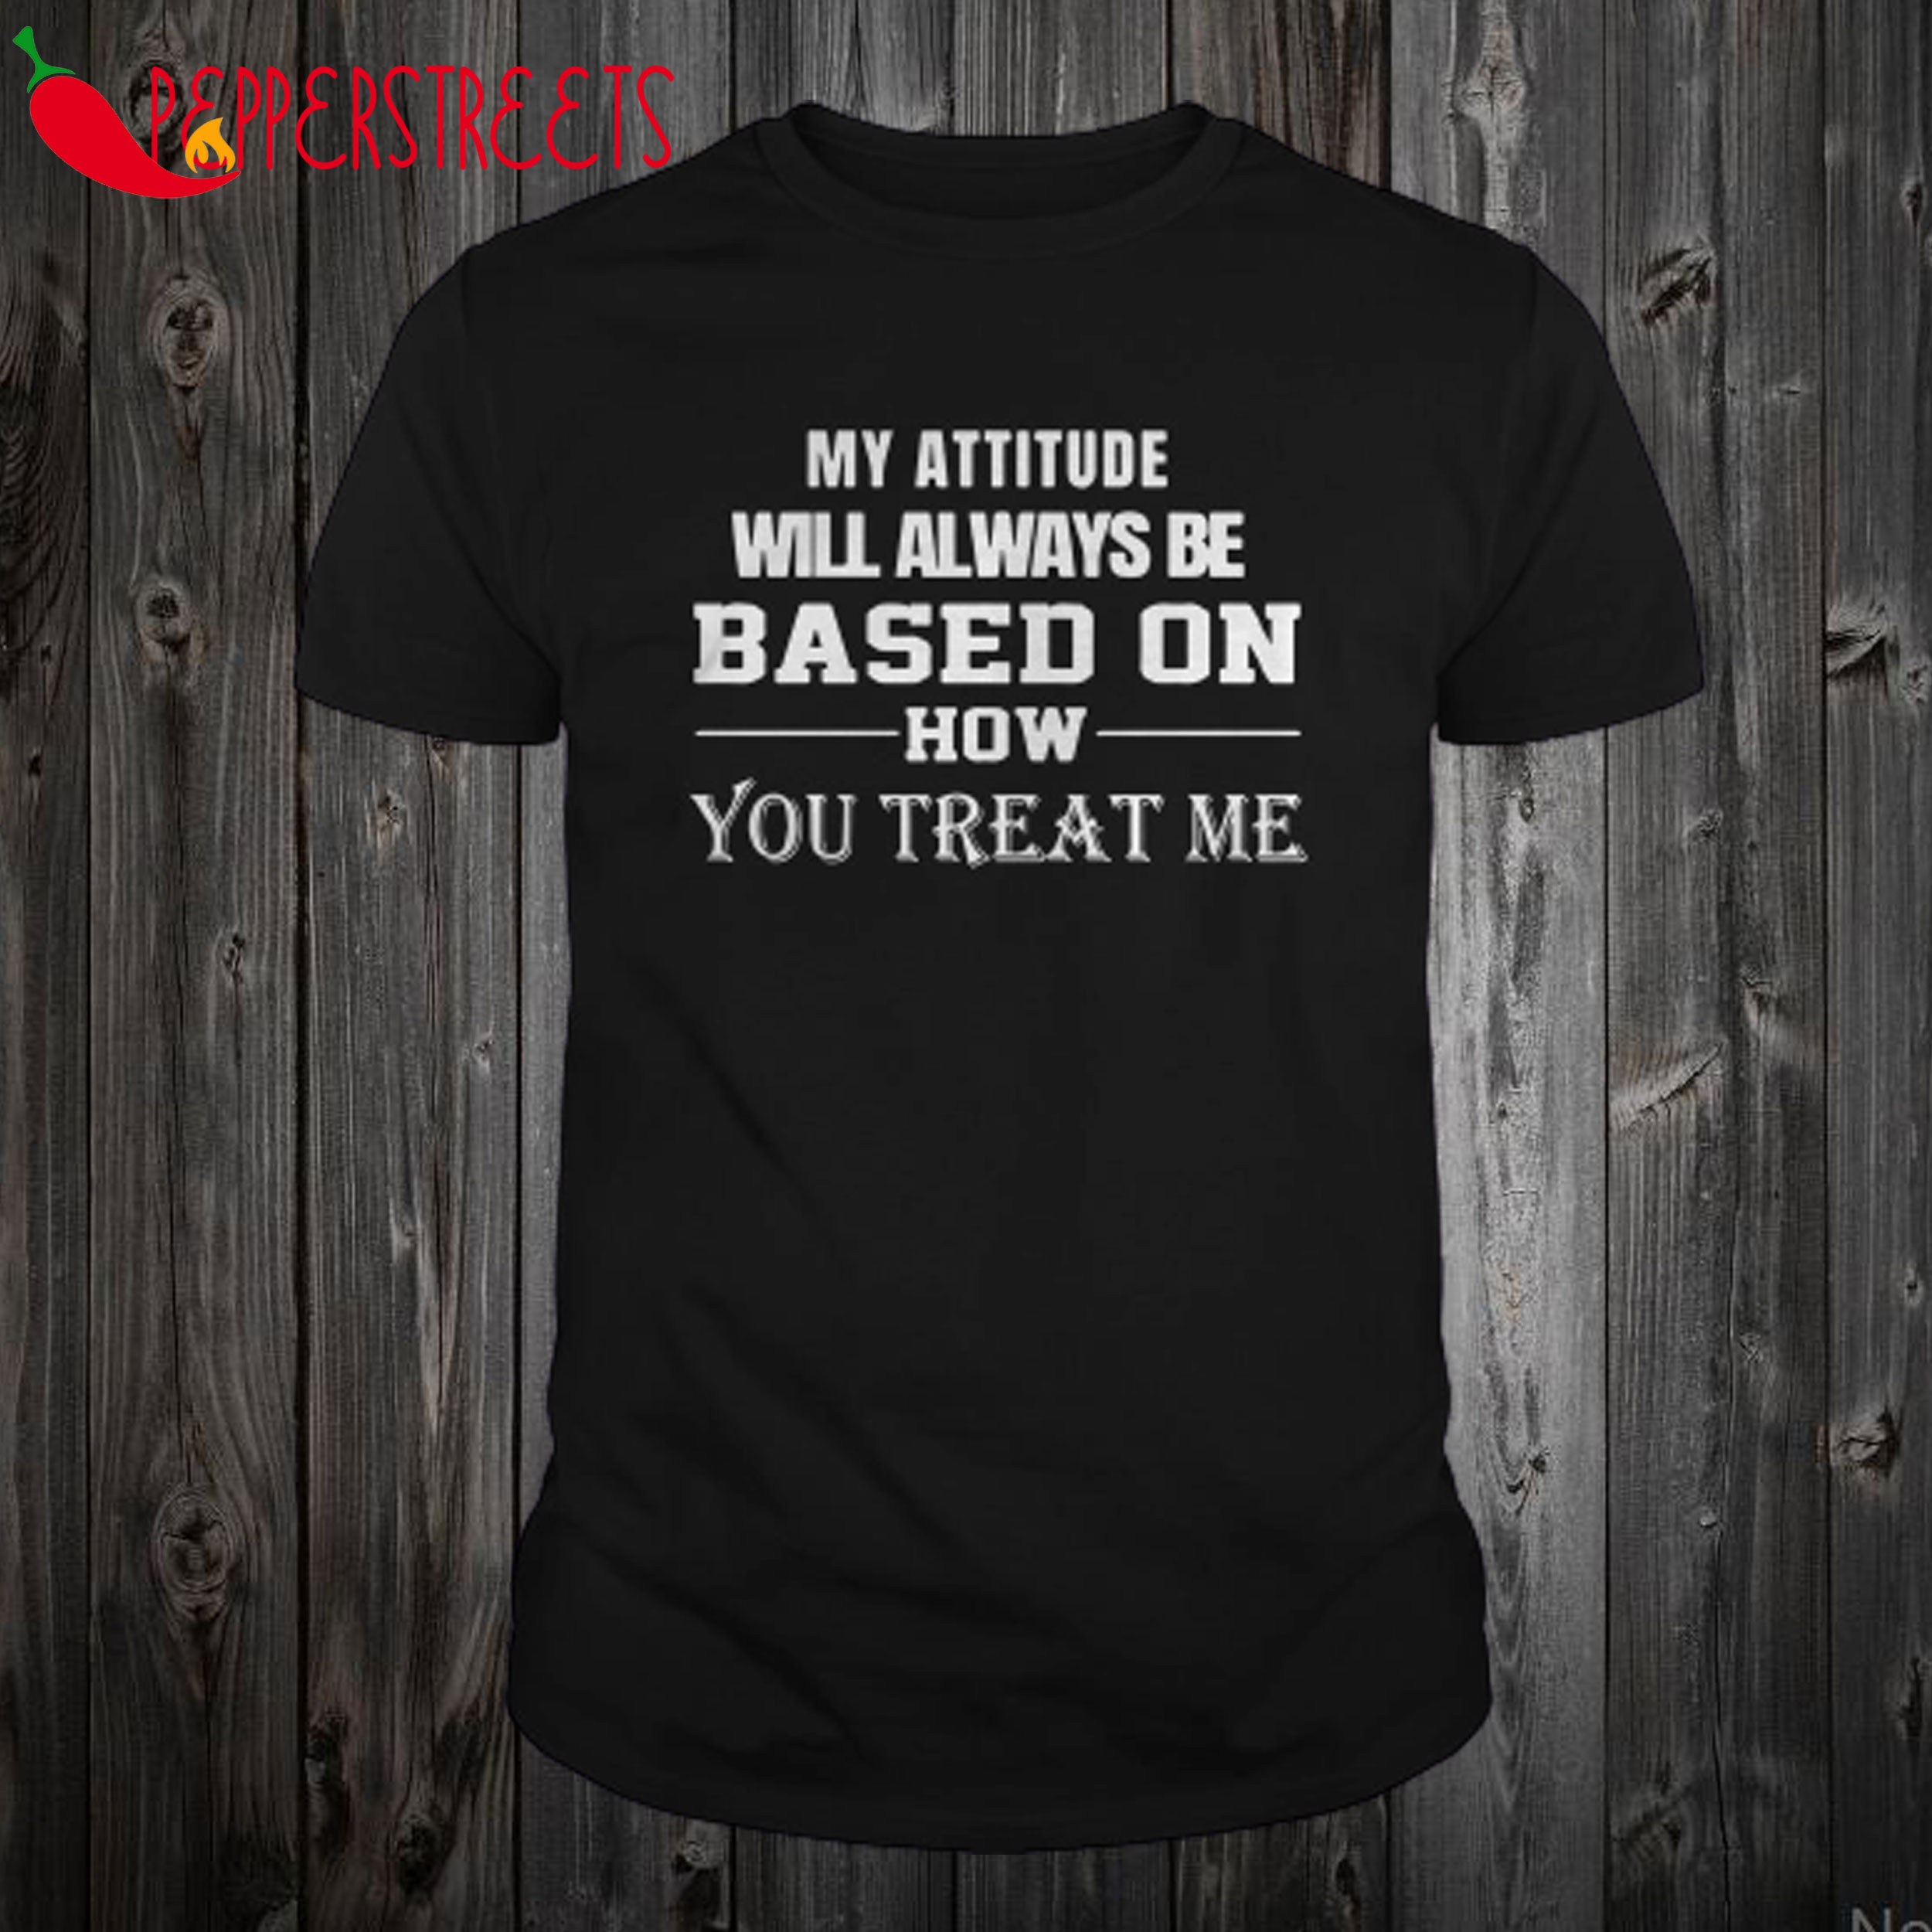 My Attitude Will Always Be Based On How You Treat Me T Shirt